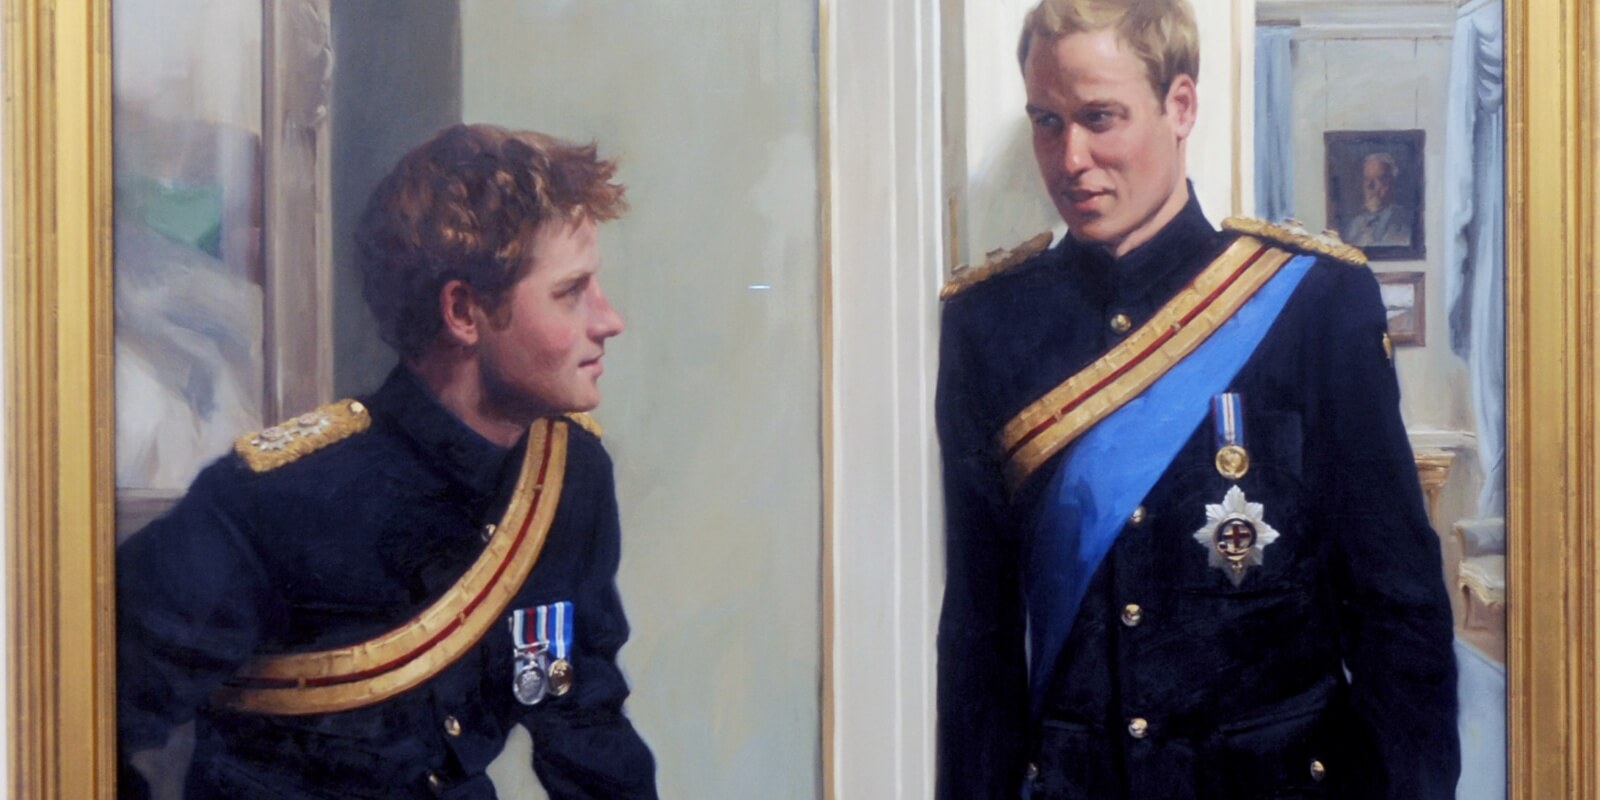 A portrait of Prince Harry and Prince William has been removed from the National Gallery in London.